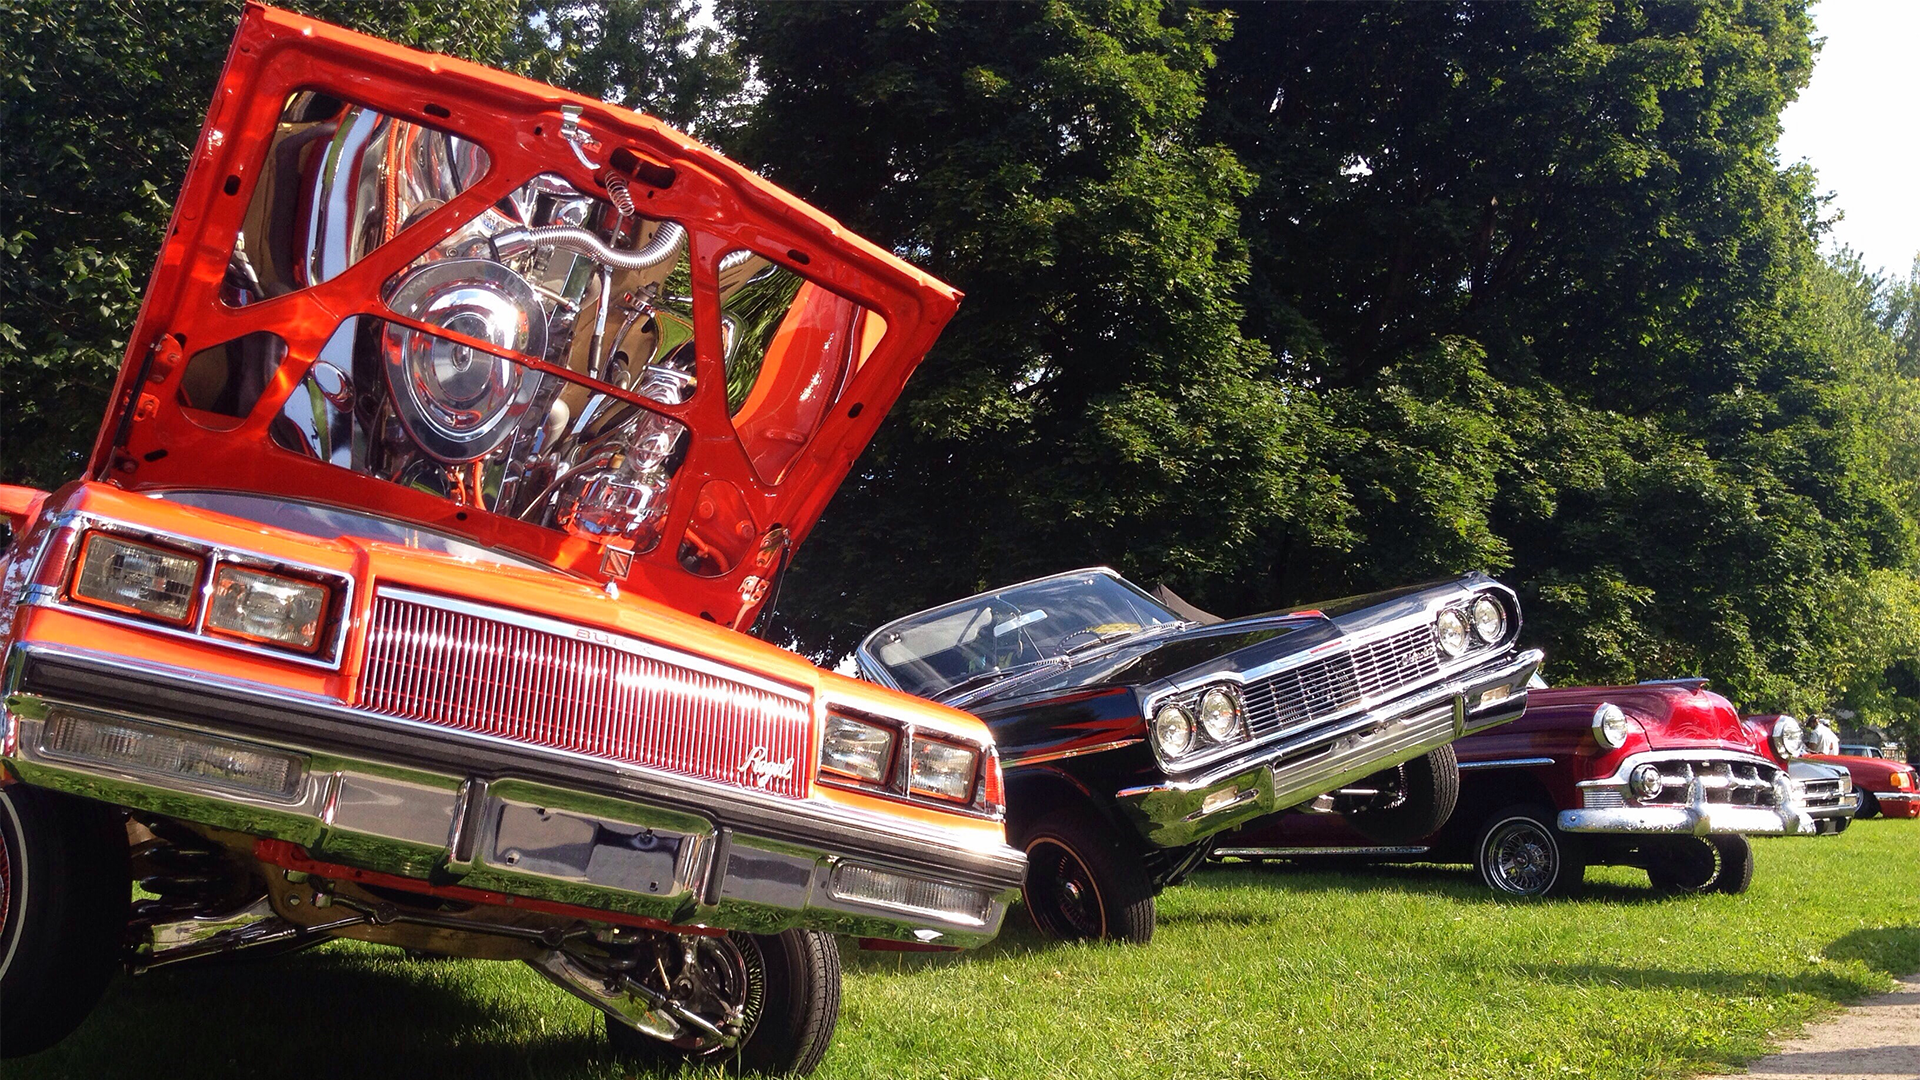 Low rider cars on display